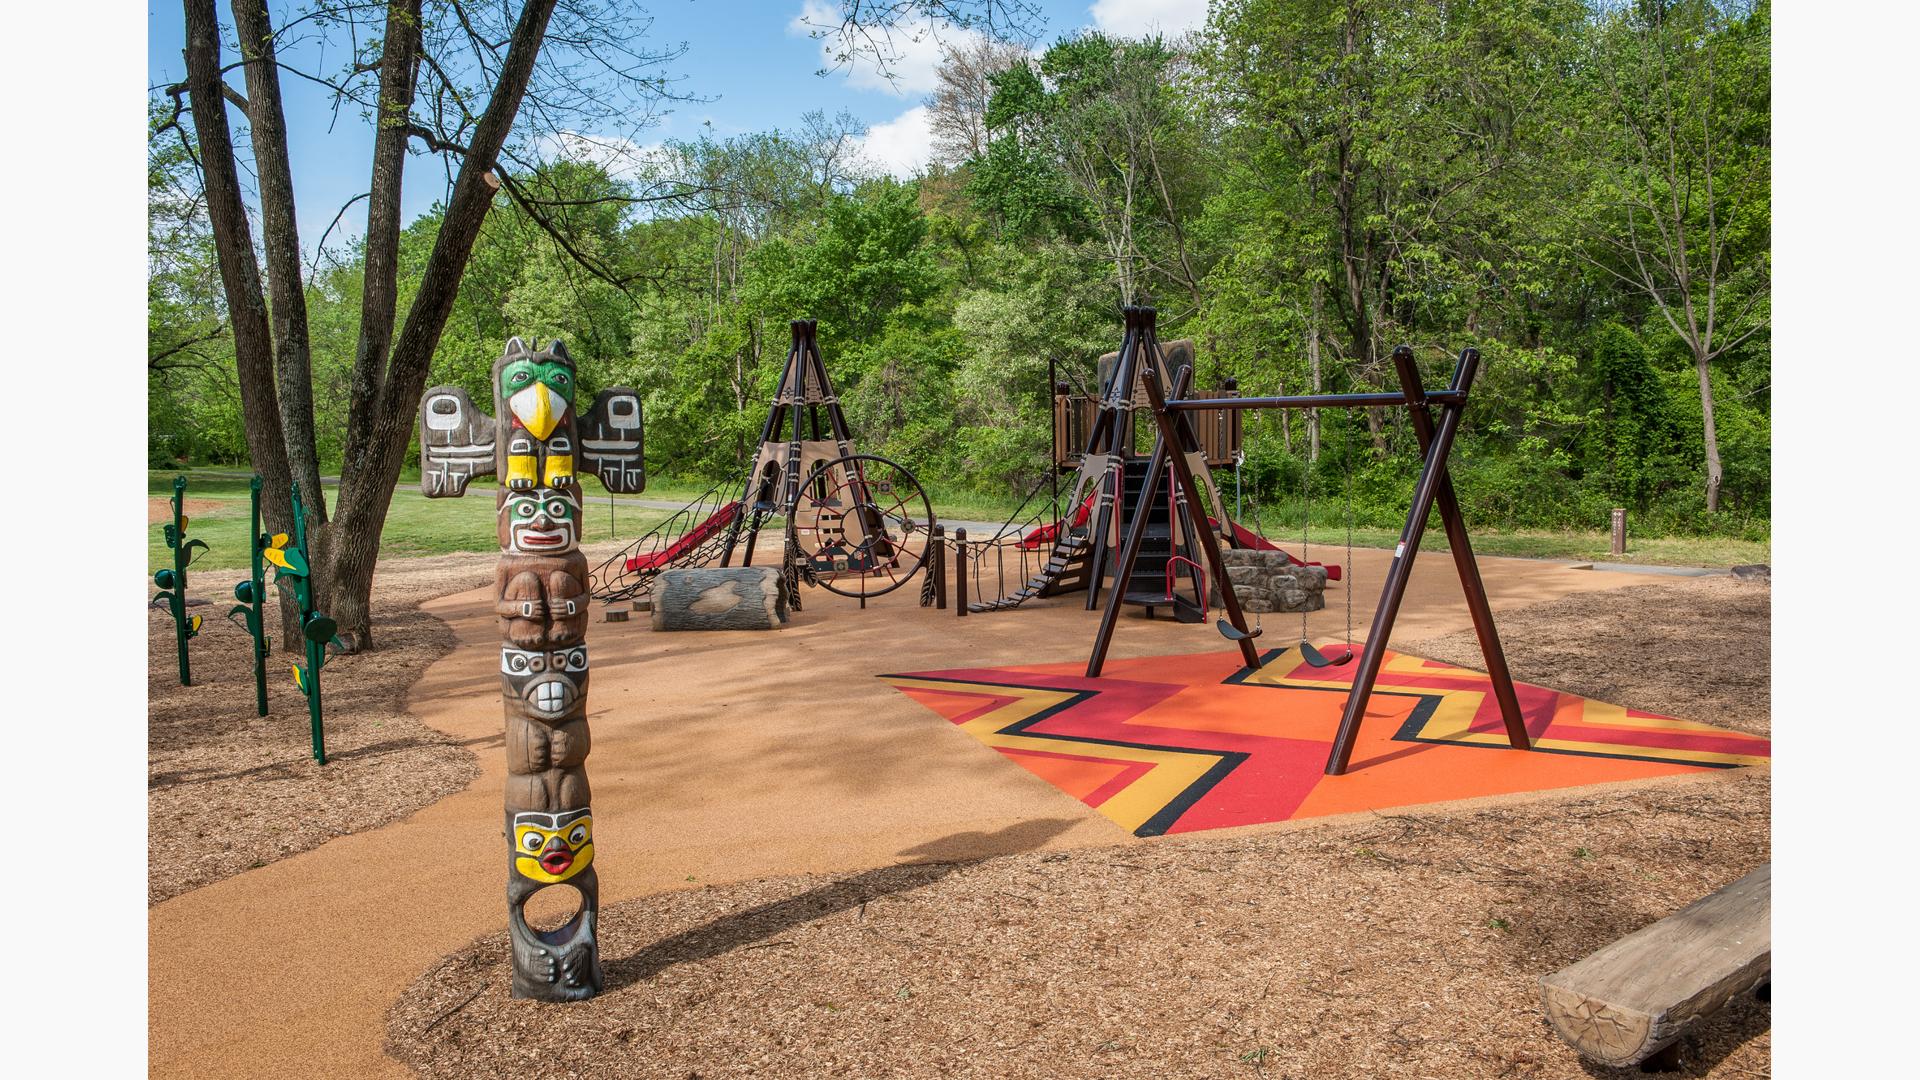 Surrounded by forest, this custom Native American-themed playground combines playtime and history.